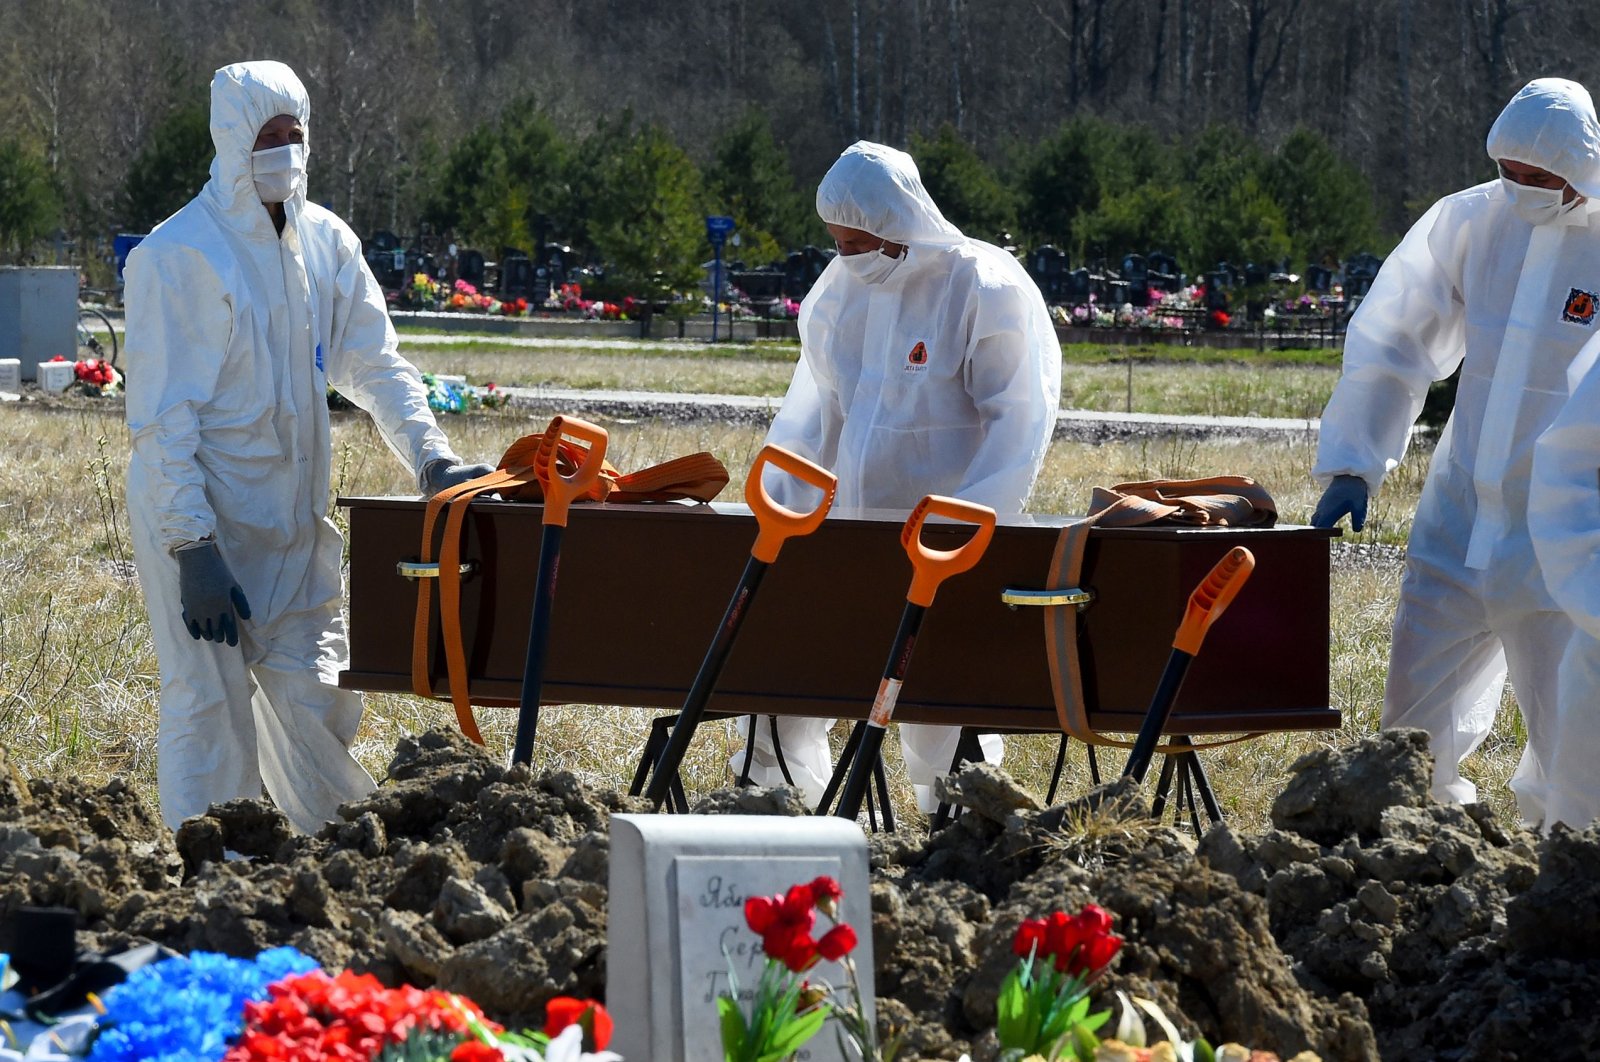 Cemetery workers wearing protective gear bury a coronavirus victim at a cemetery on the outskirts of Saint Petersburg, Russia, May 6, 2020. (AFP Photo)